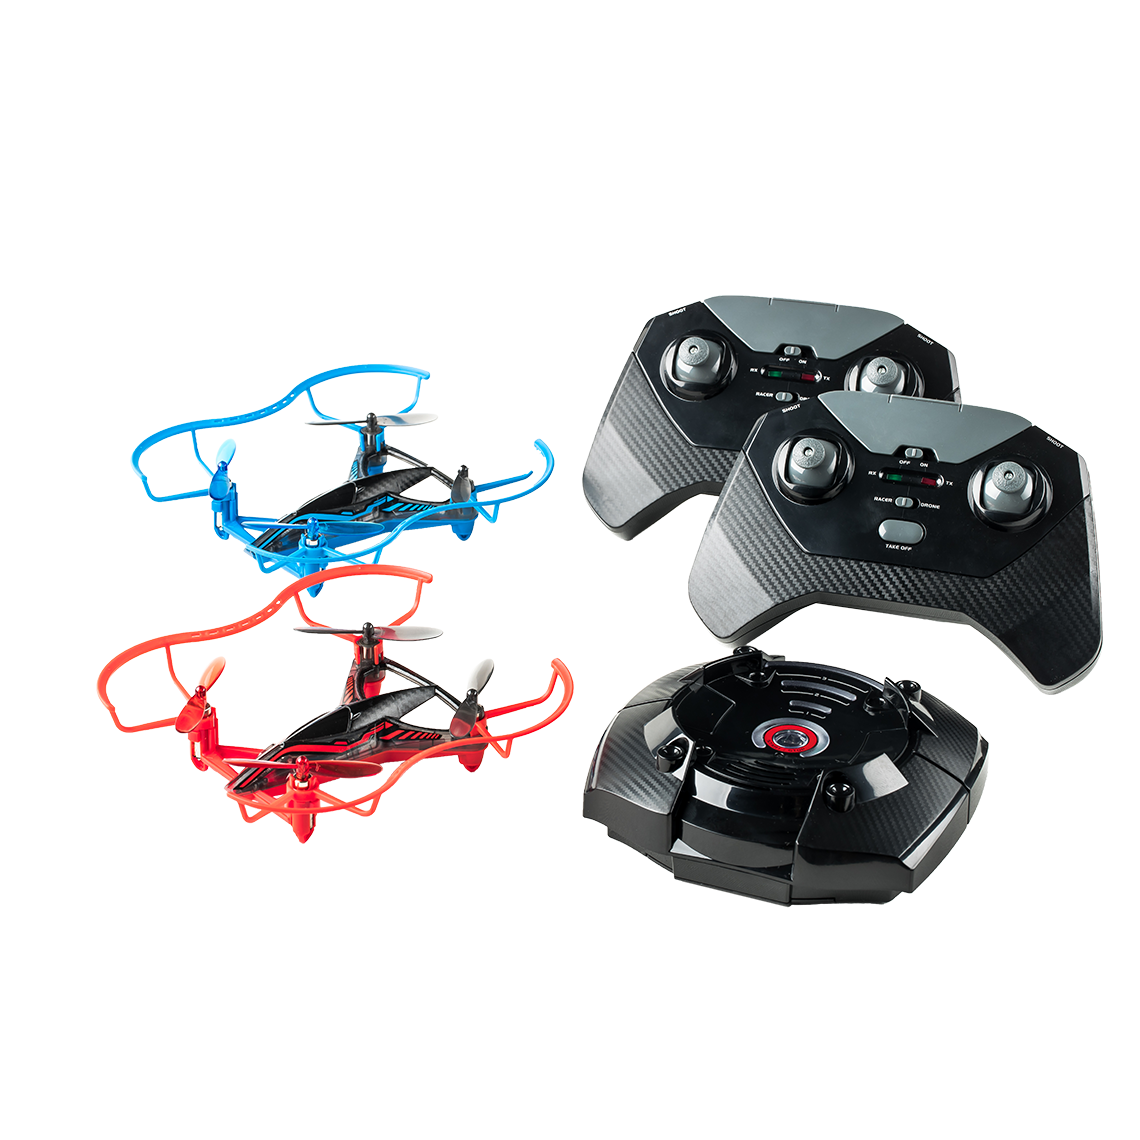 SilverLit Flybotic Stunt Drone Cascadeur 2.4 GHz 33 cm USB Charger Included